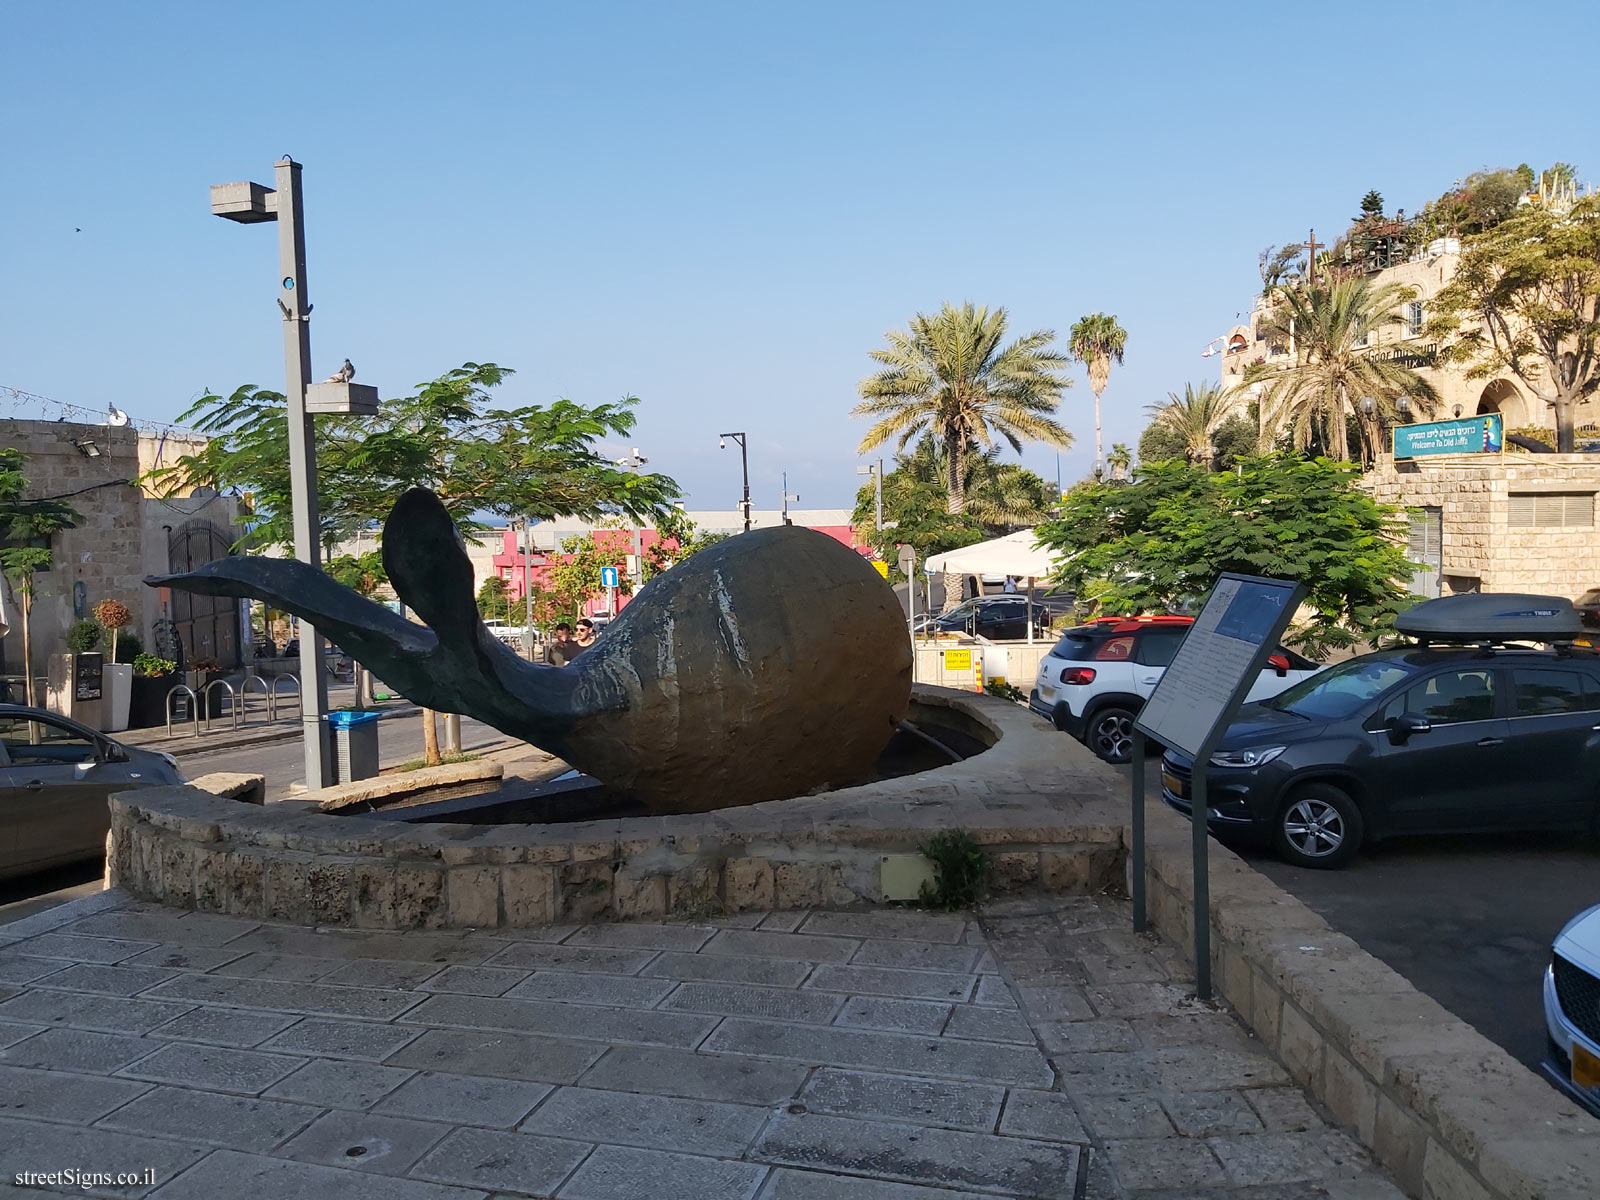 Old Jaffa - The Whale Sculpture